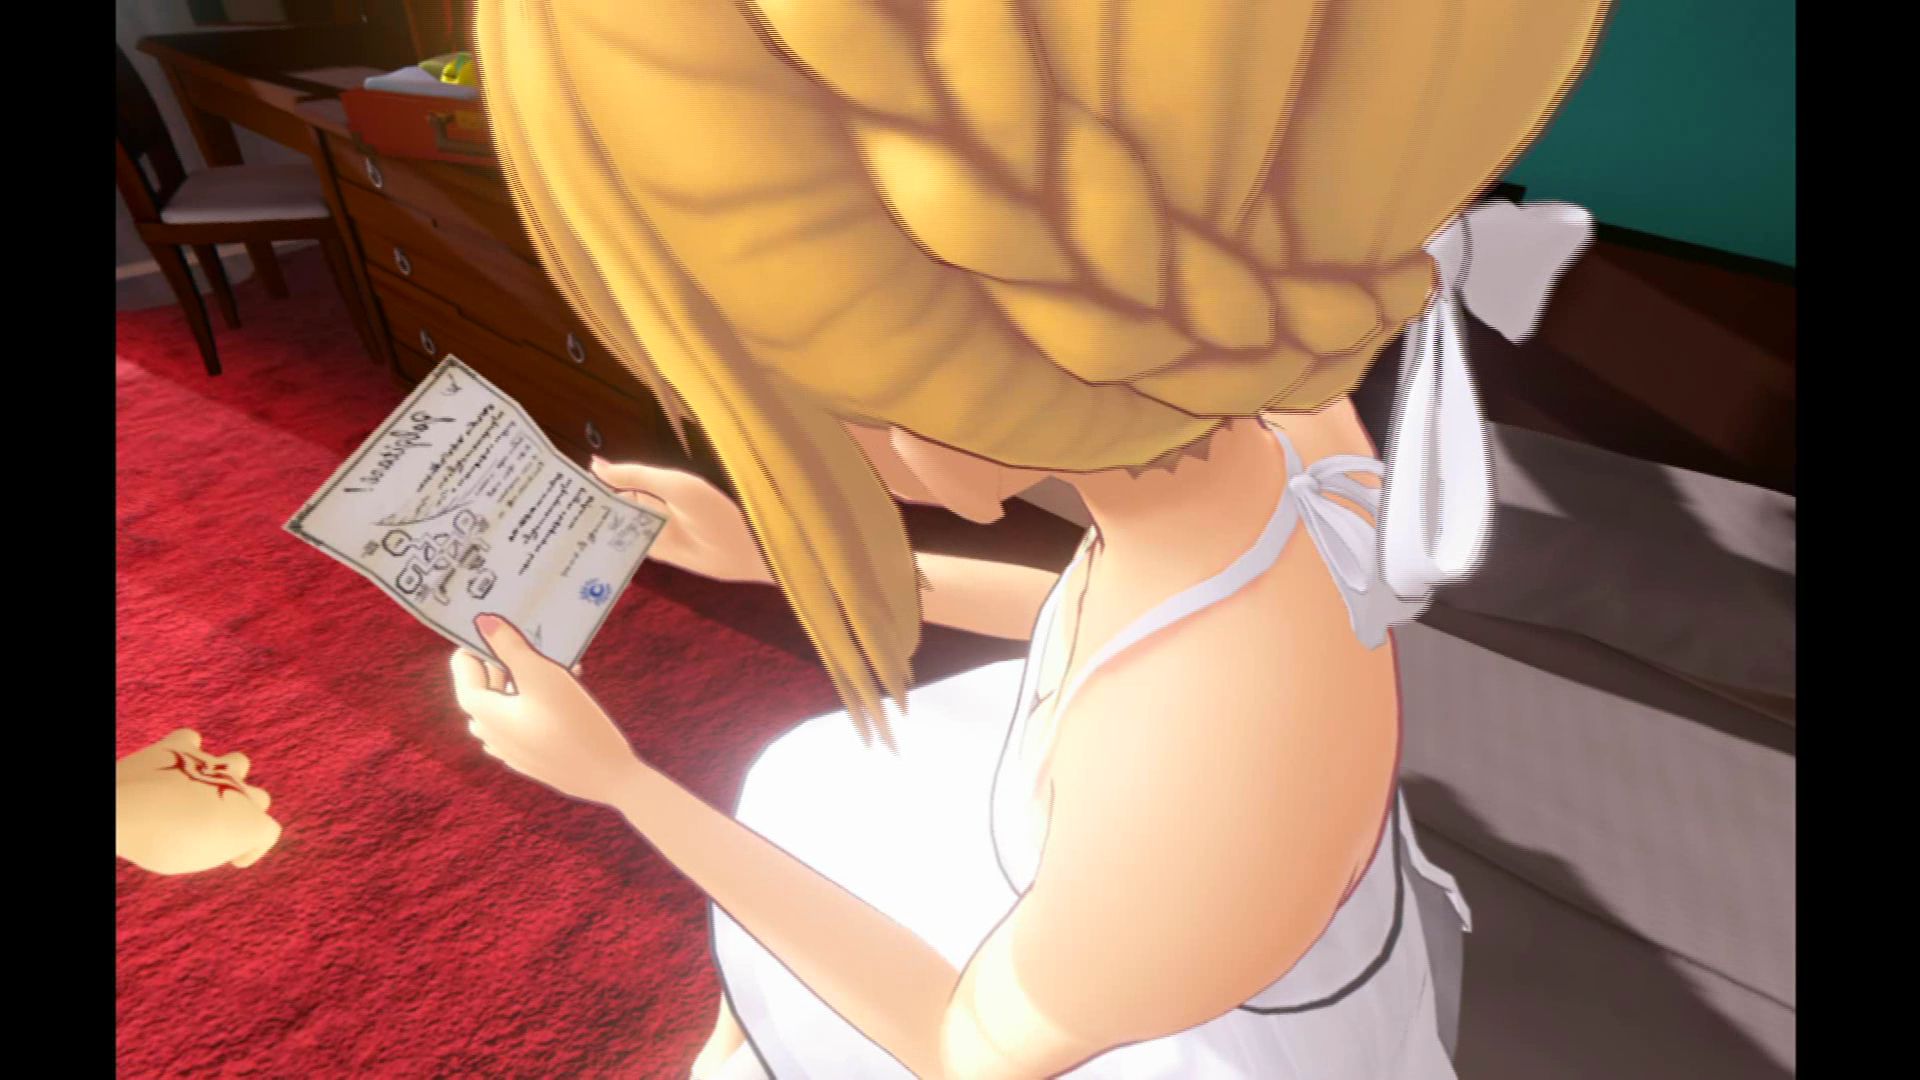 [Fate/Grand order VR] Maschsee underwear and breast! The underwear of the alto rear, too! 24